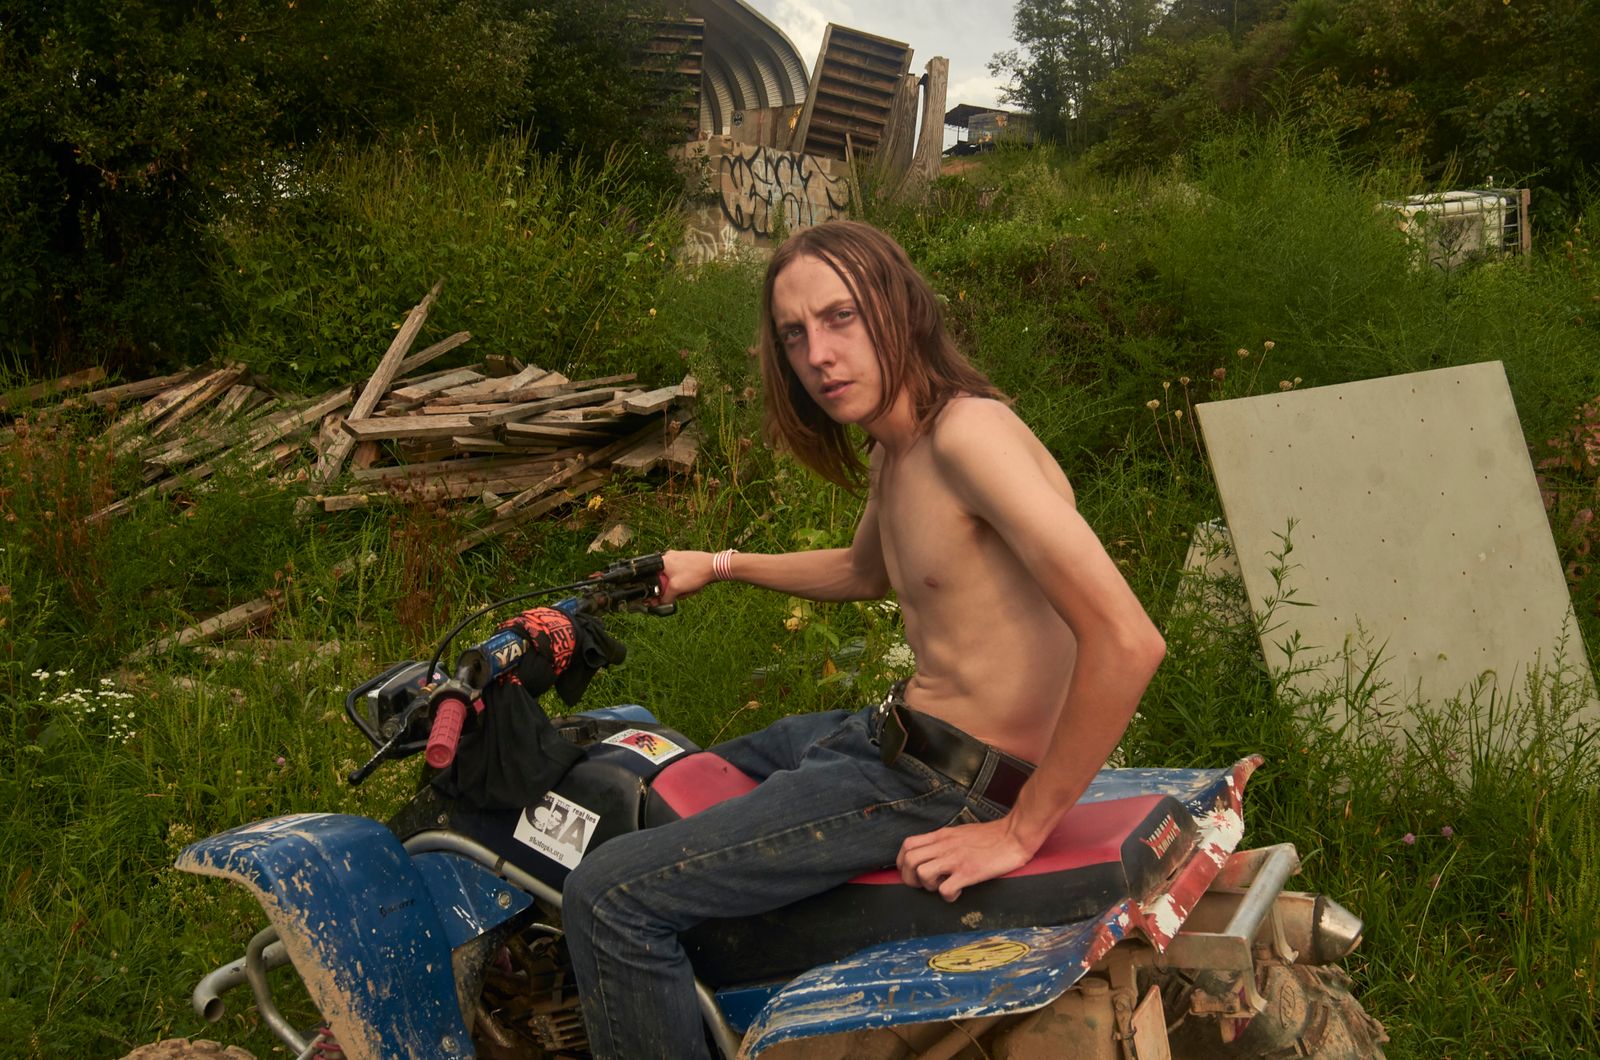 © Stacy Kranitz - Image from the From the Study on Post Pubescent Manhood photography project